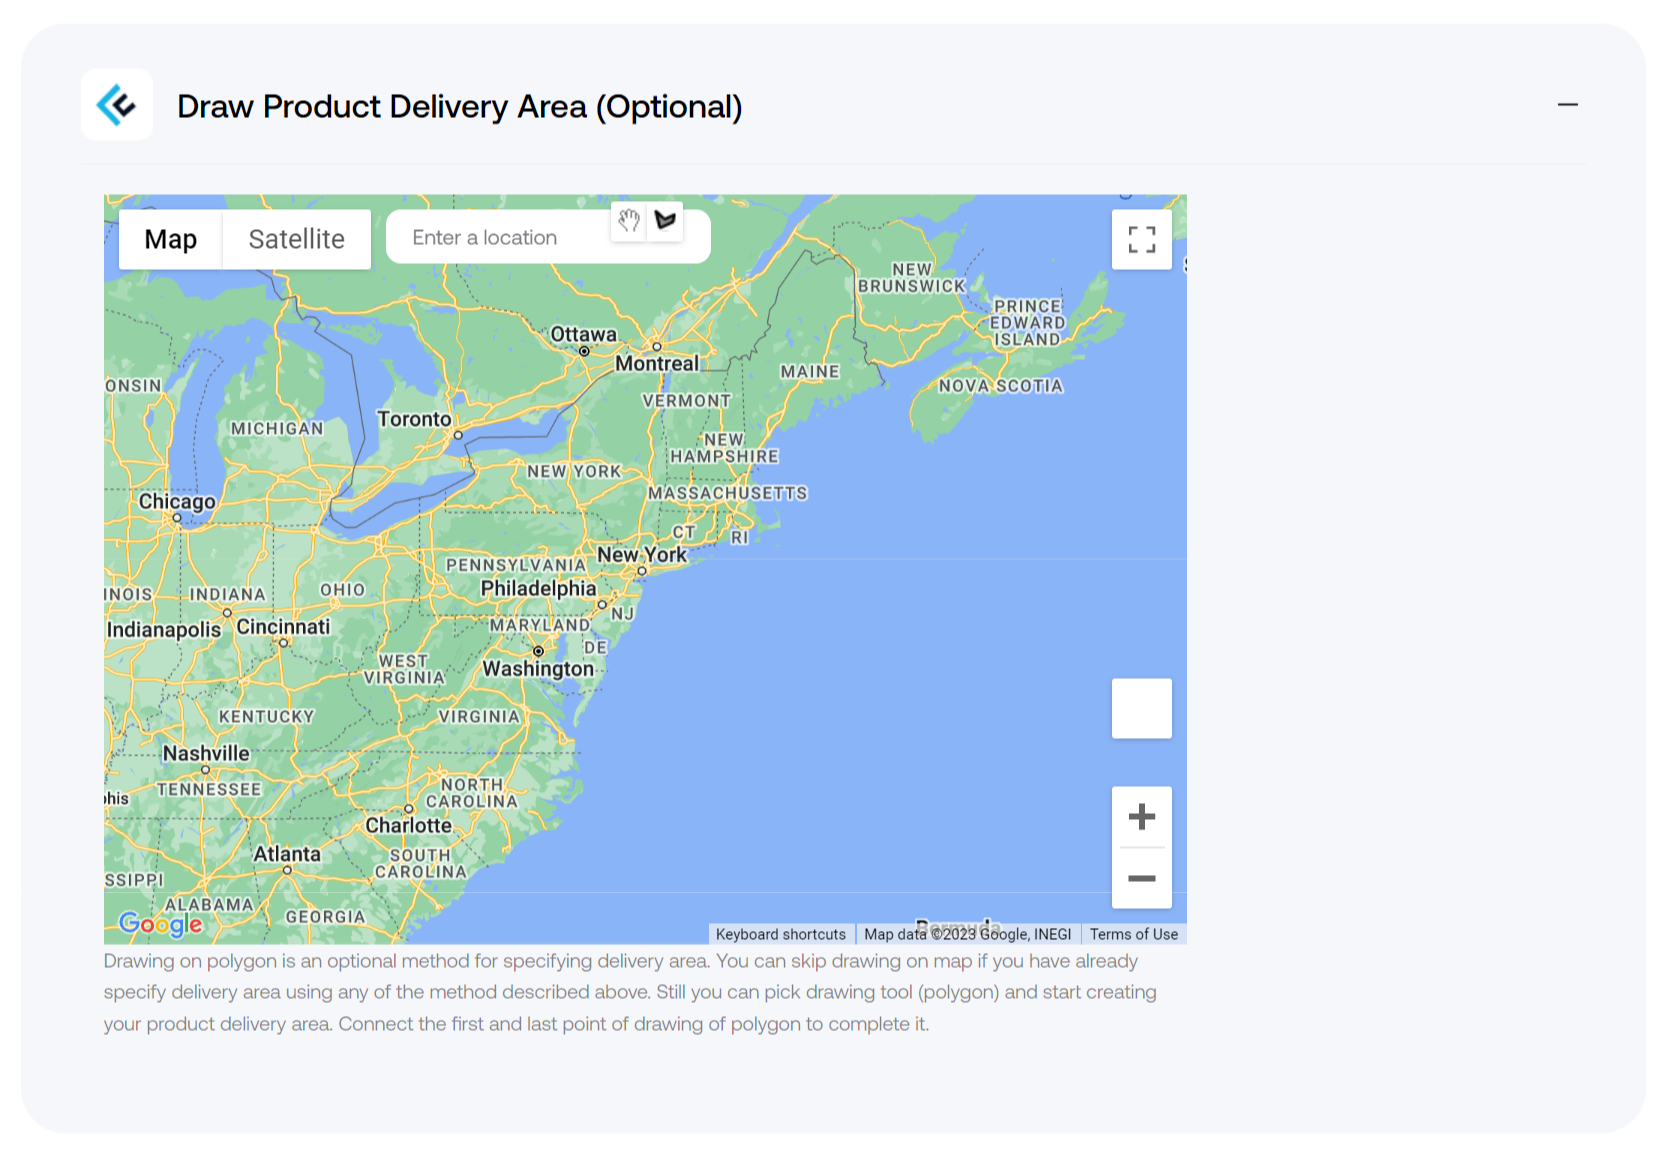 Draw Product Delivery Area on google maps